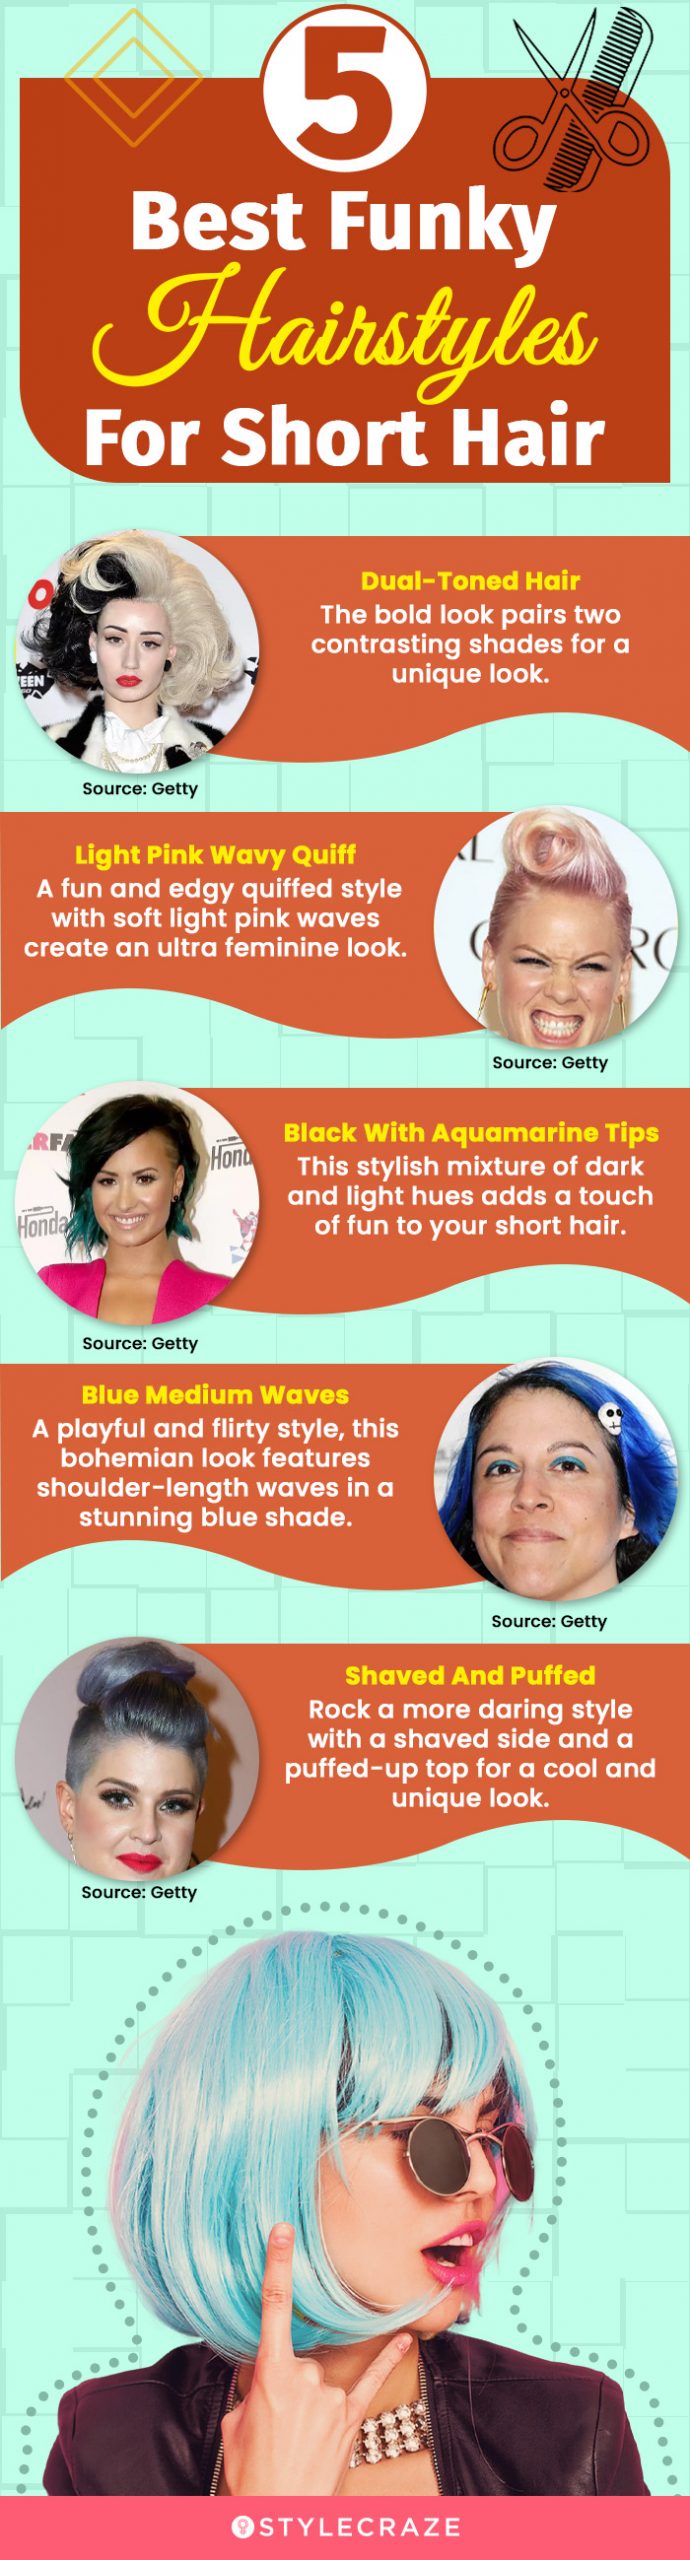 5 best funky hairstyles for short hair (infographic)